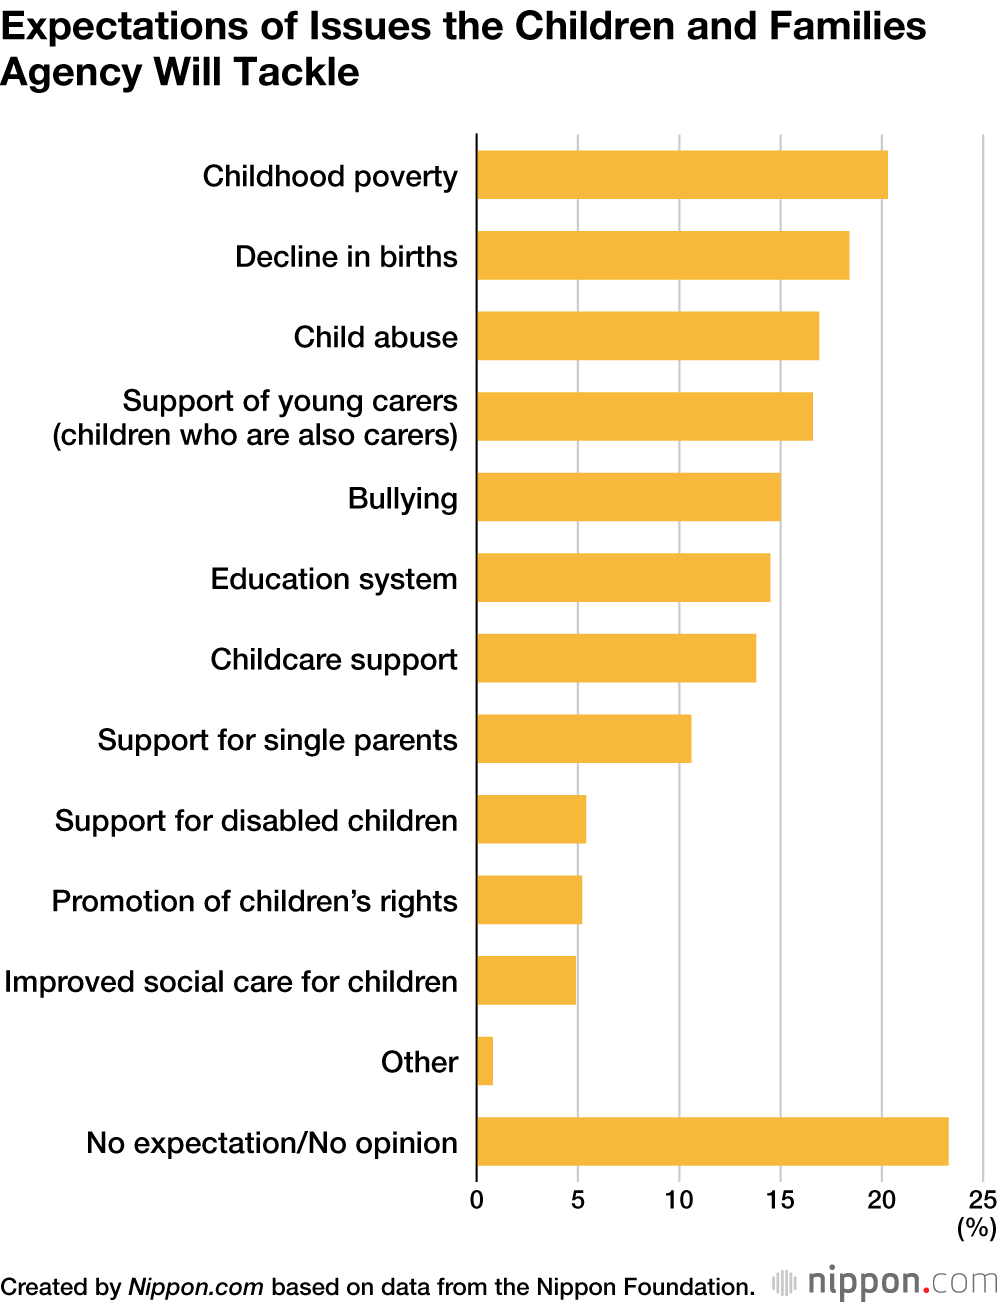 Expectations of Issues the Children and Families Agency Will Tackle